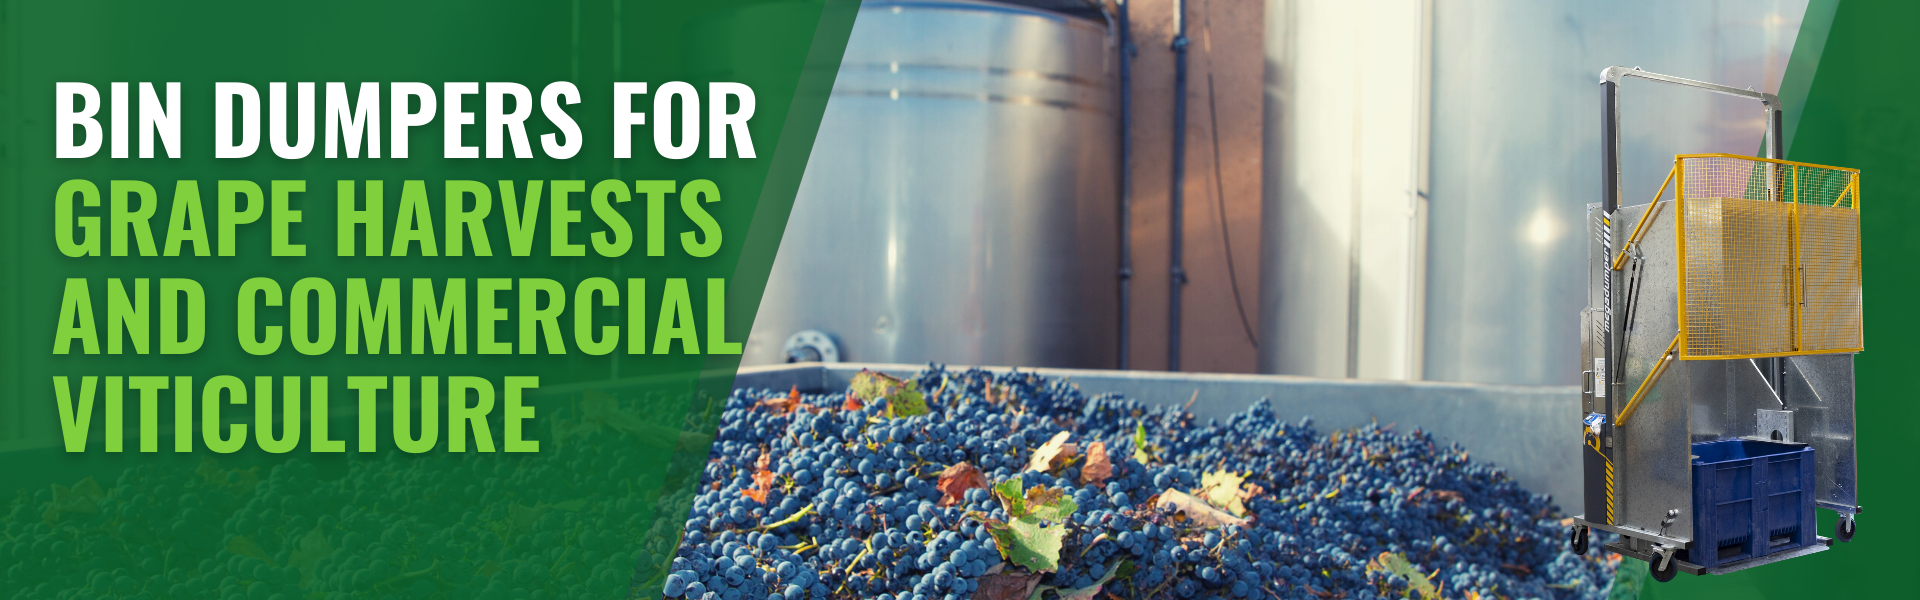 Bin Dumpers for Grape Harvests and Commercial Viticulture